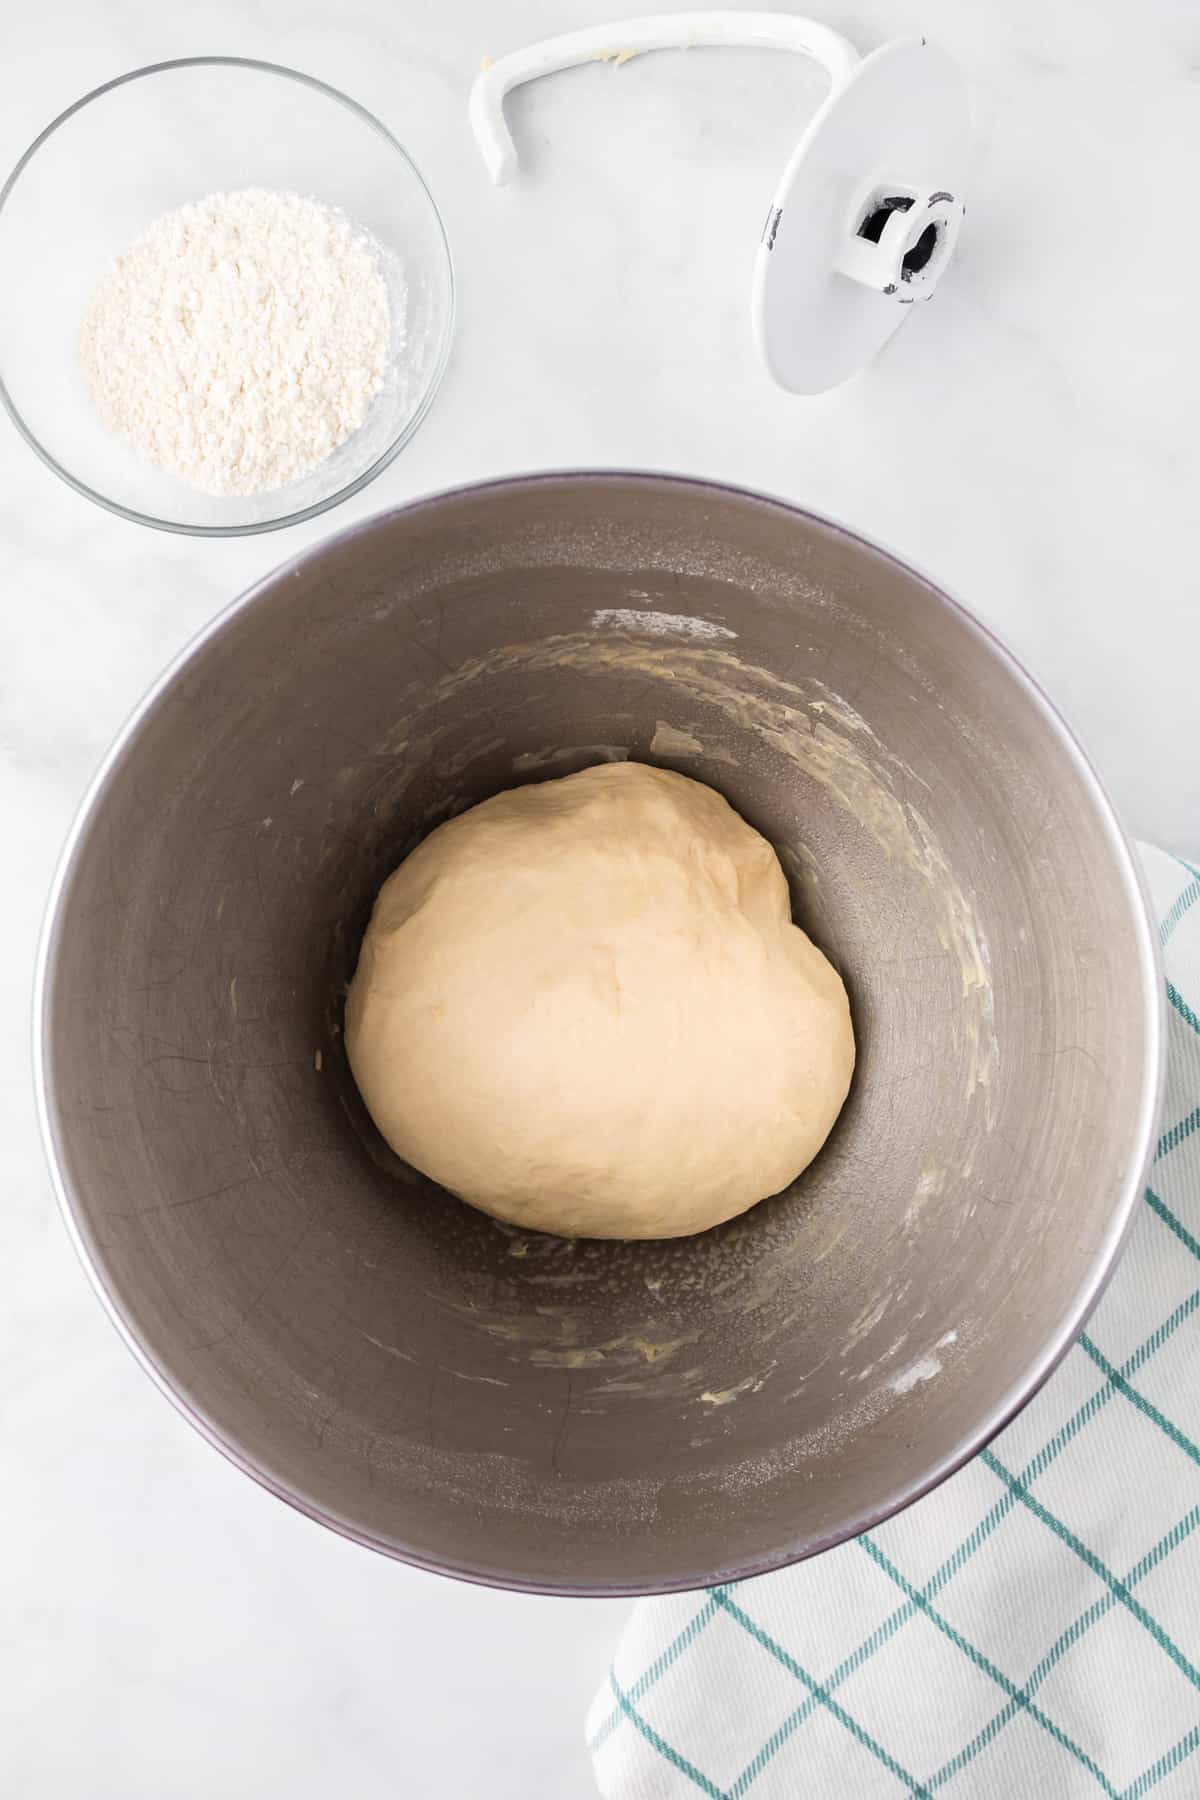 Garlic knot dough after mixing in a large mixing bowl with a dough hook and more flour in a bowl nearby on the counter from overhead.